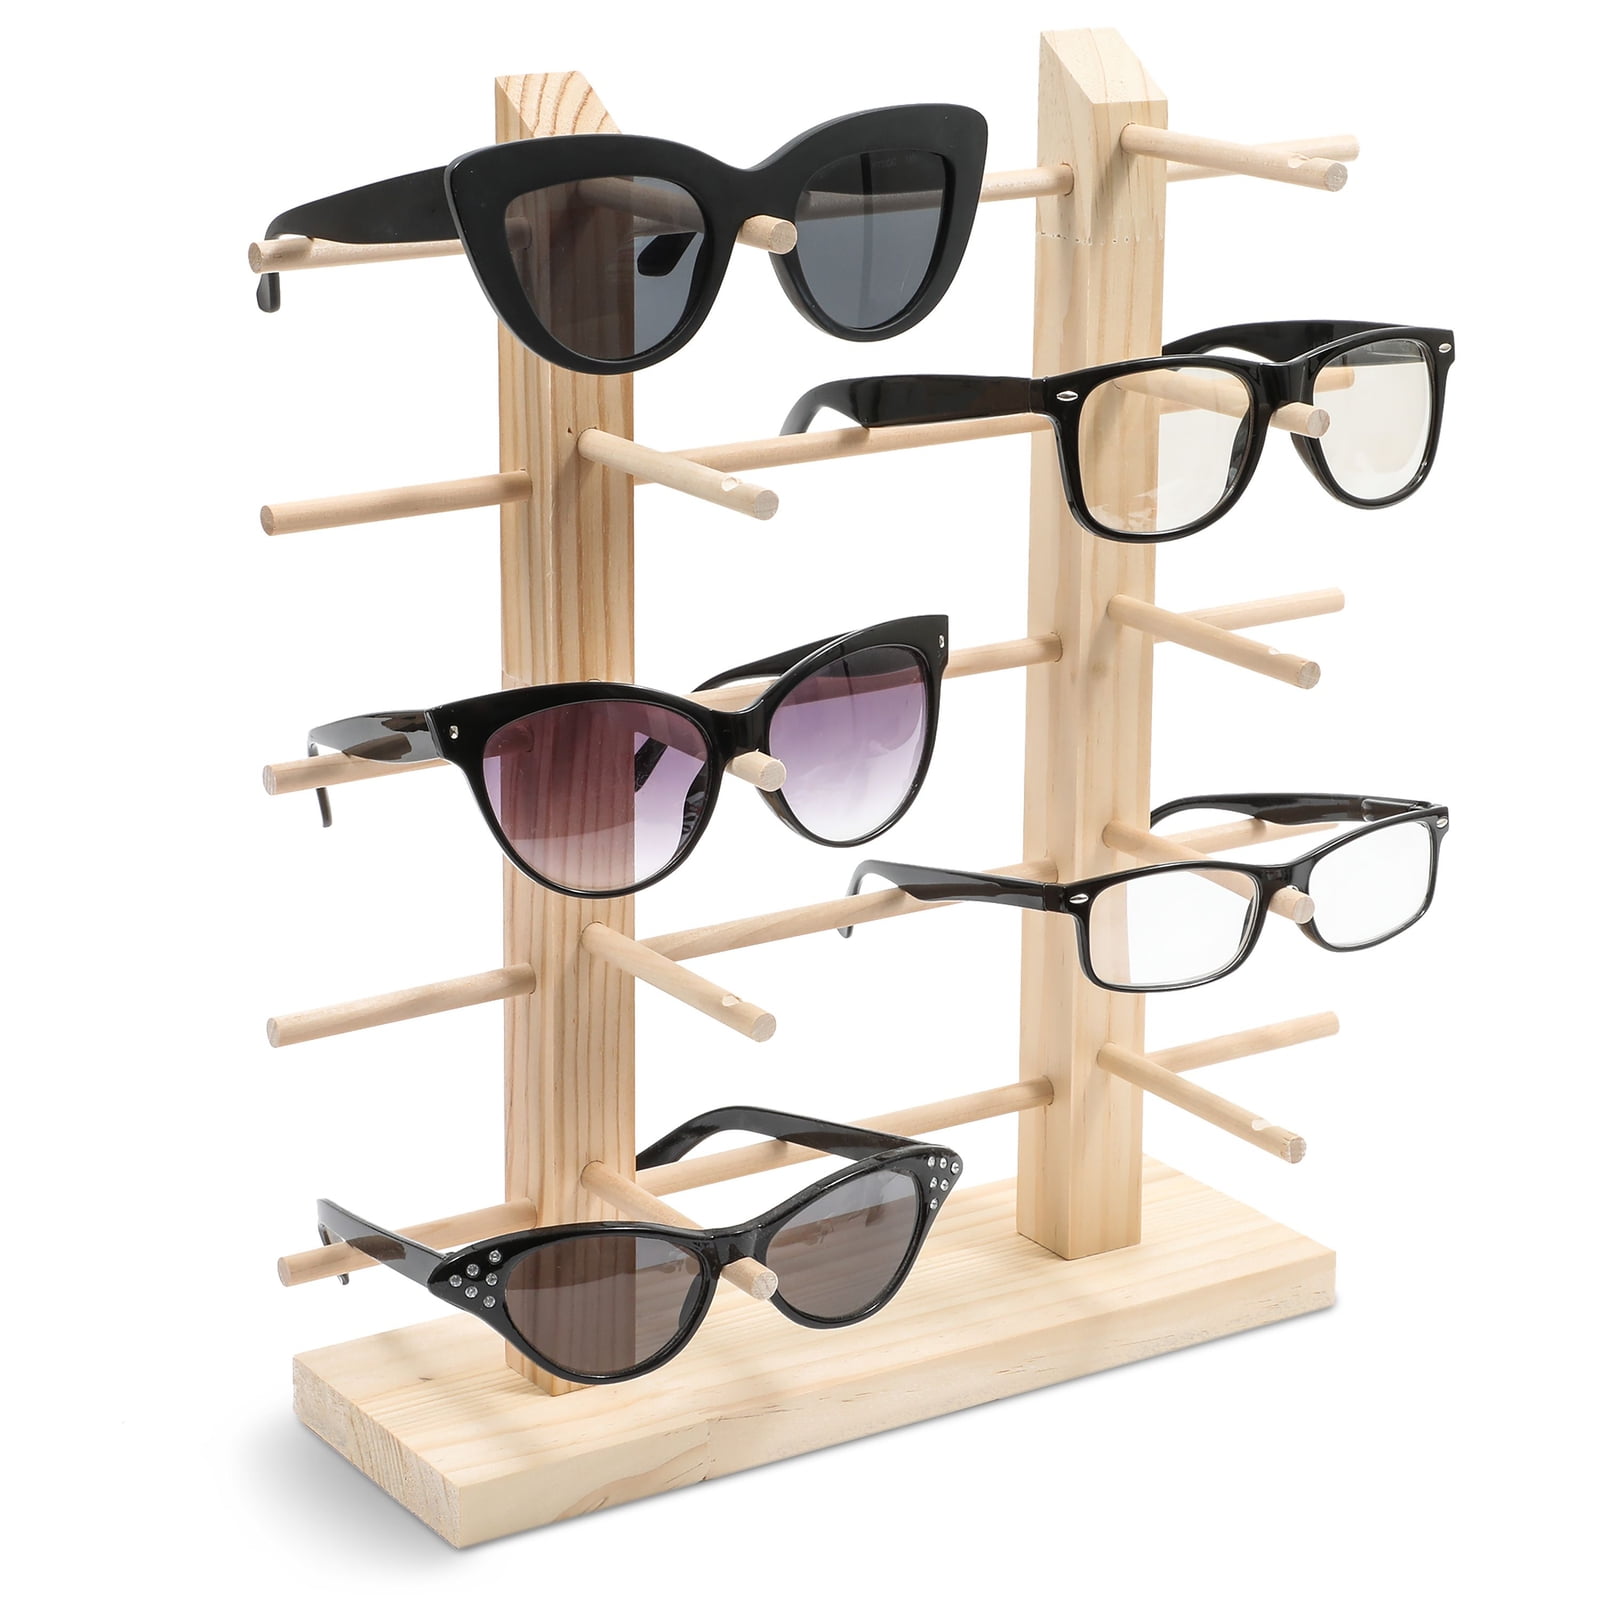 3-6 Tiers Sunglasses Glasses Rack Retail Display Stand Shown Holder Black/White